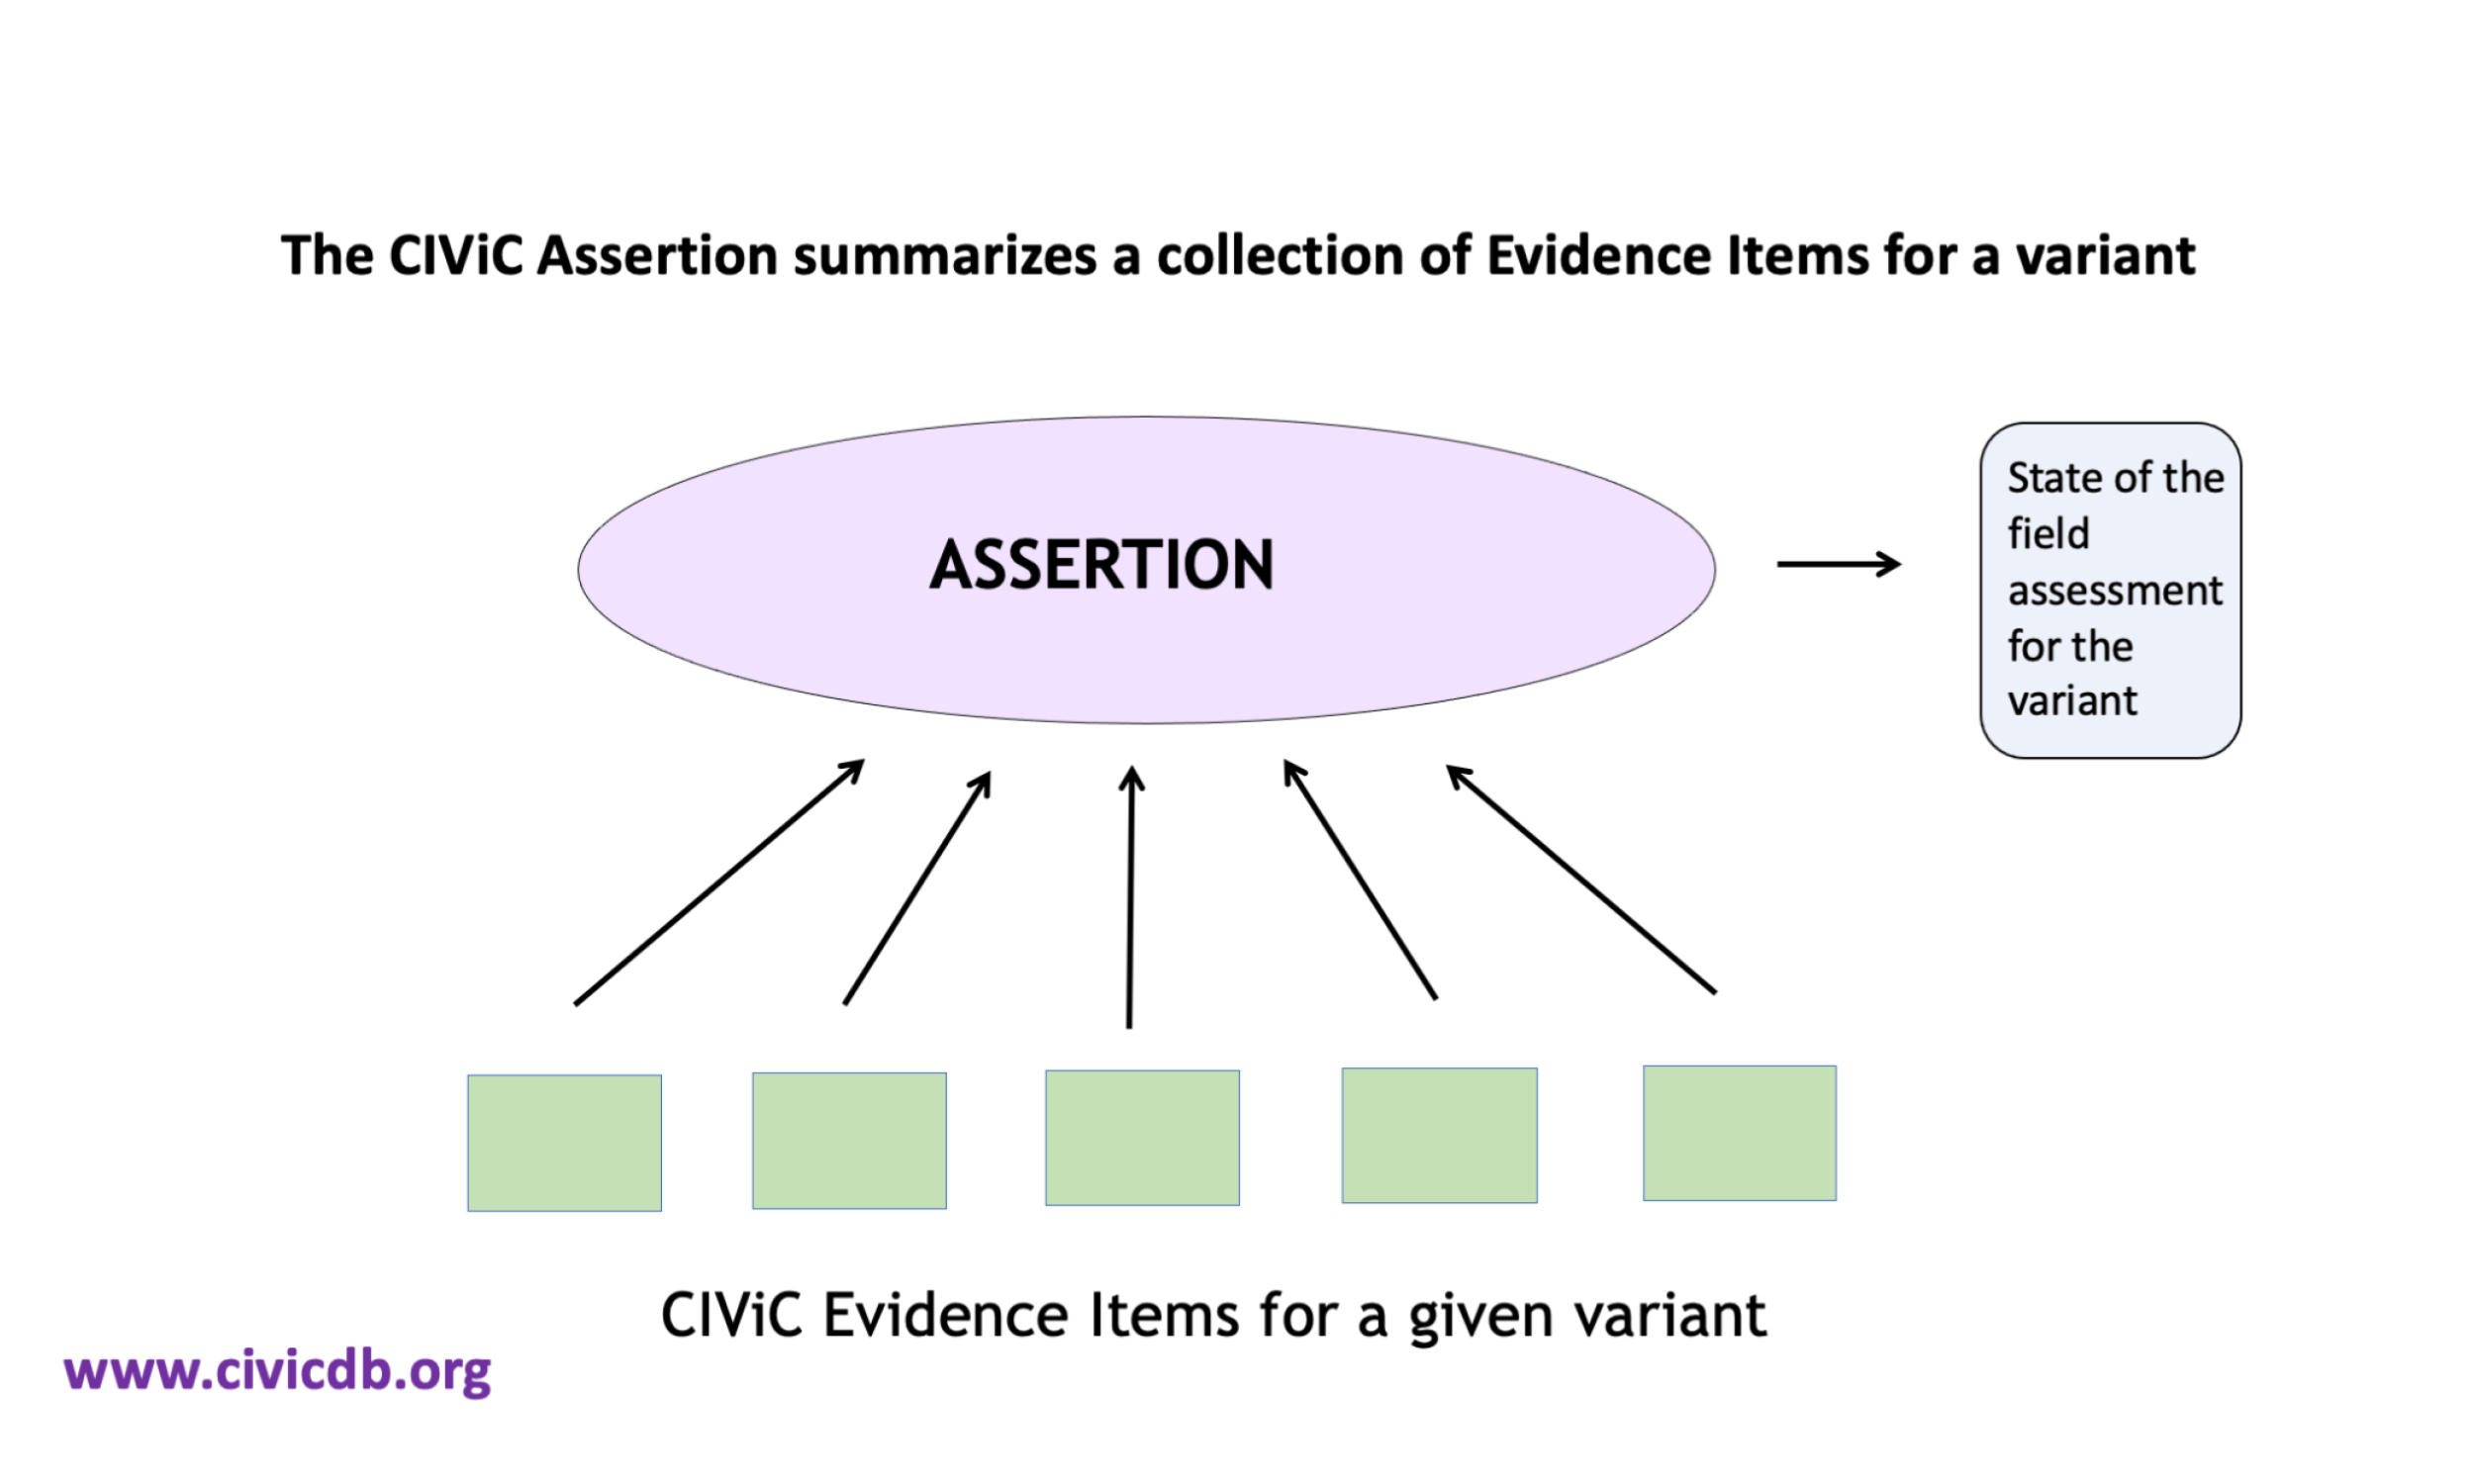 CIViC Assertions summarize a collection of evidence into a state of the field assesment of the variant